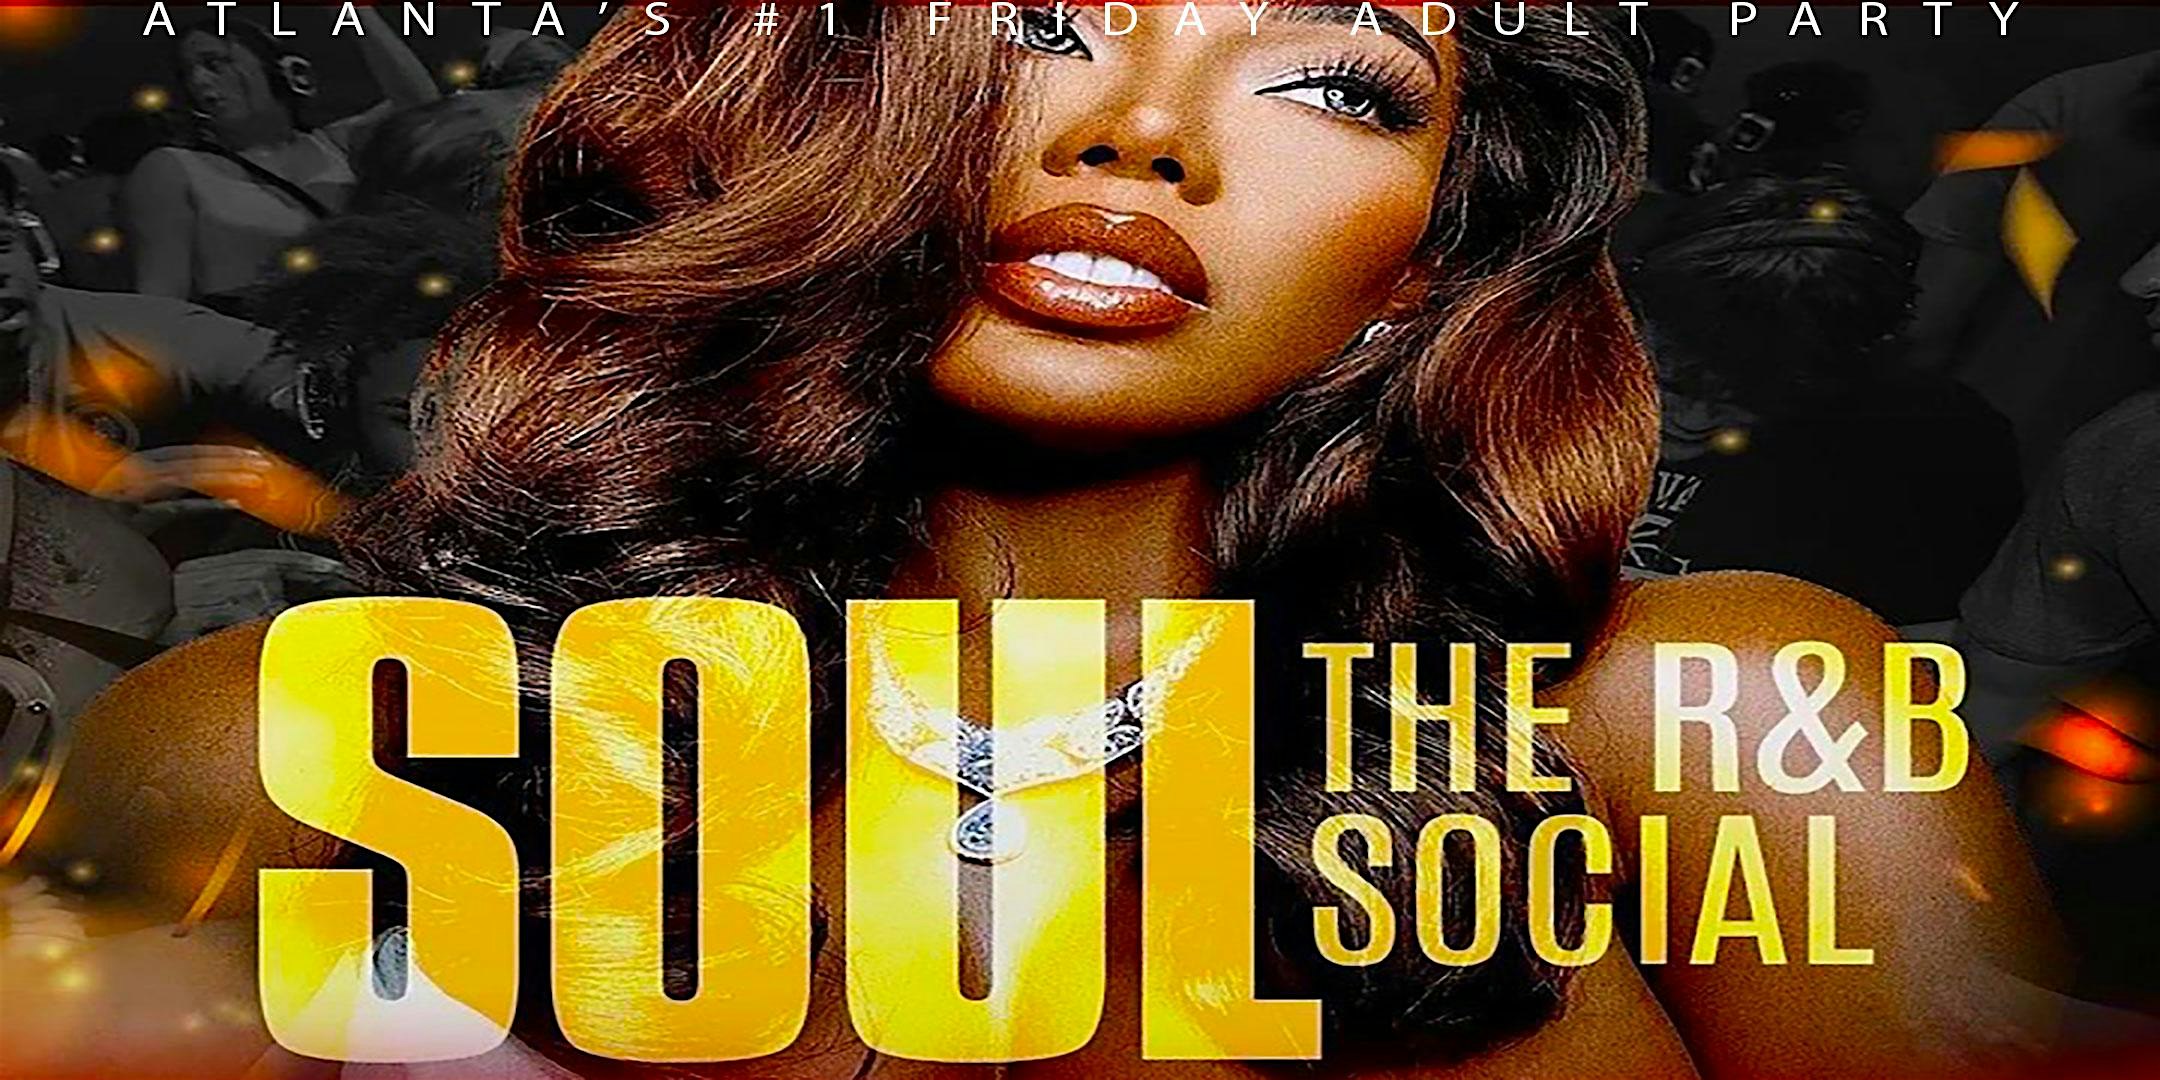 SOUL: The R&B Social - ATL's #1 Friday ADULT Party - No Rap or Trap!